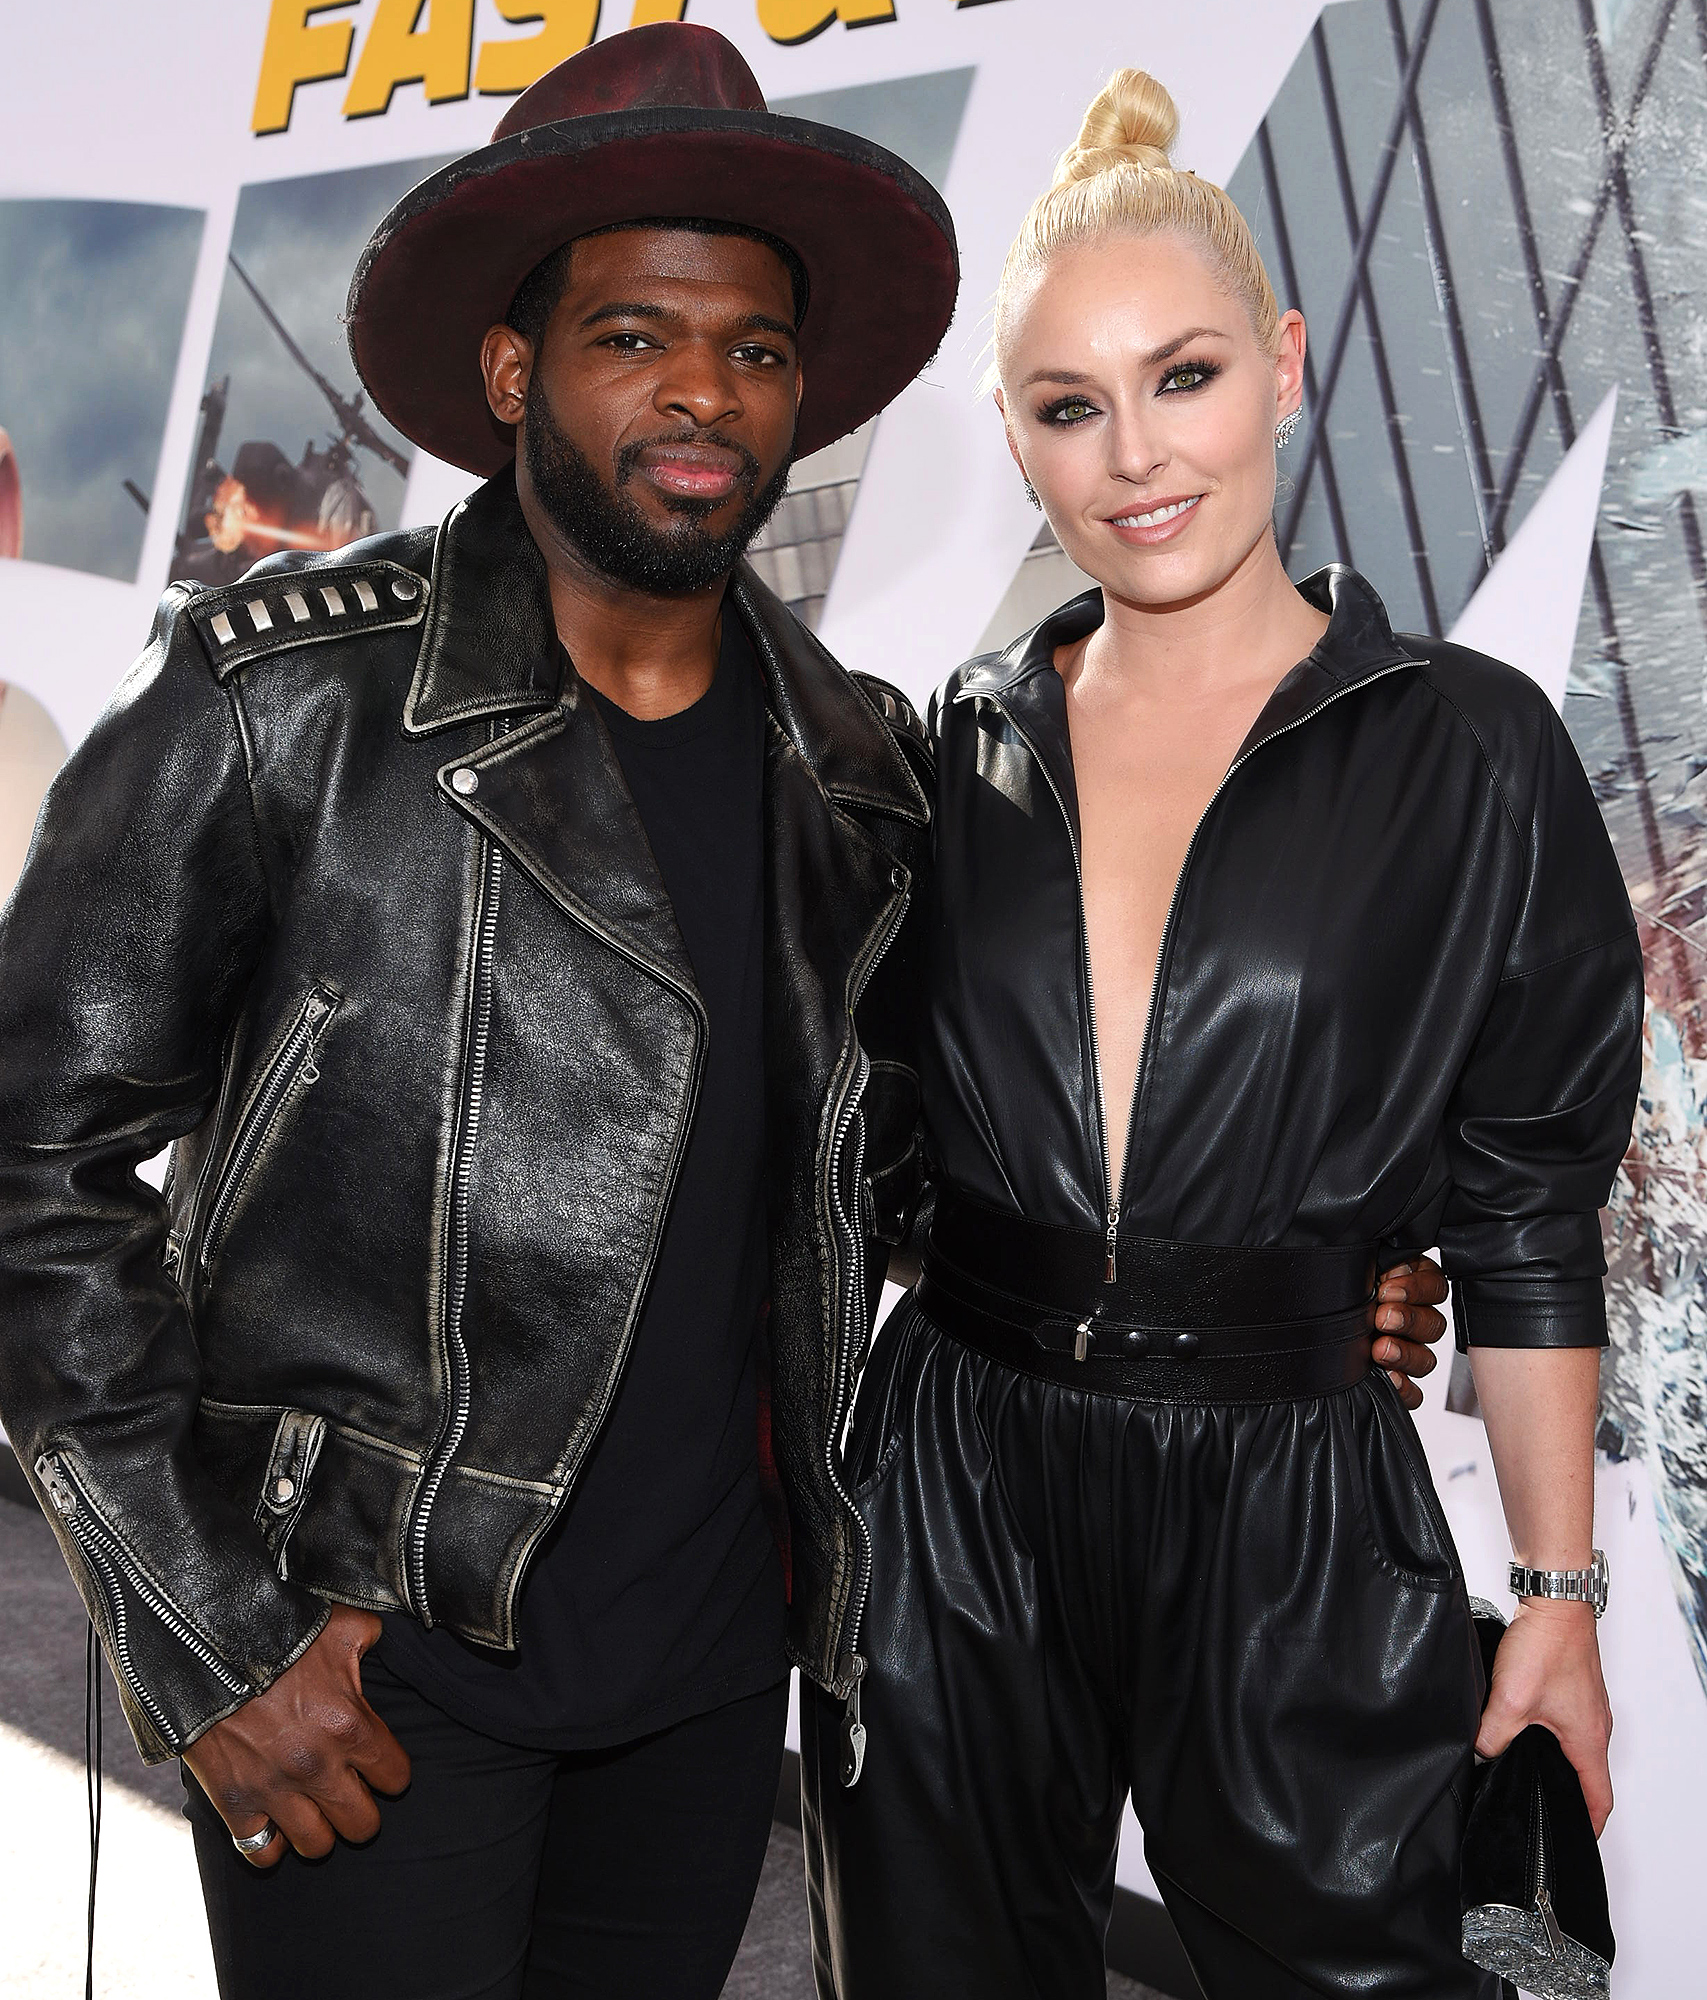 She's Got A Type: Lindsey Vonn Steps Out With Her New Partner In